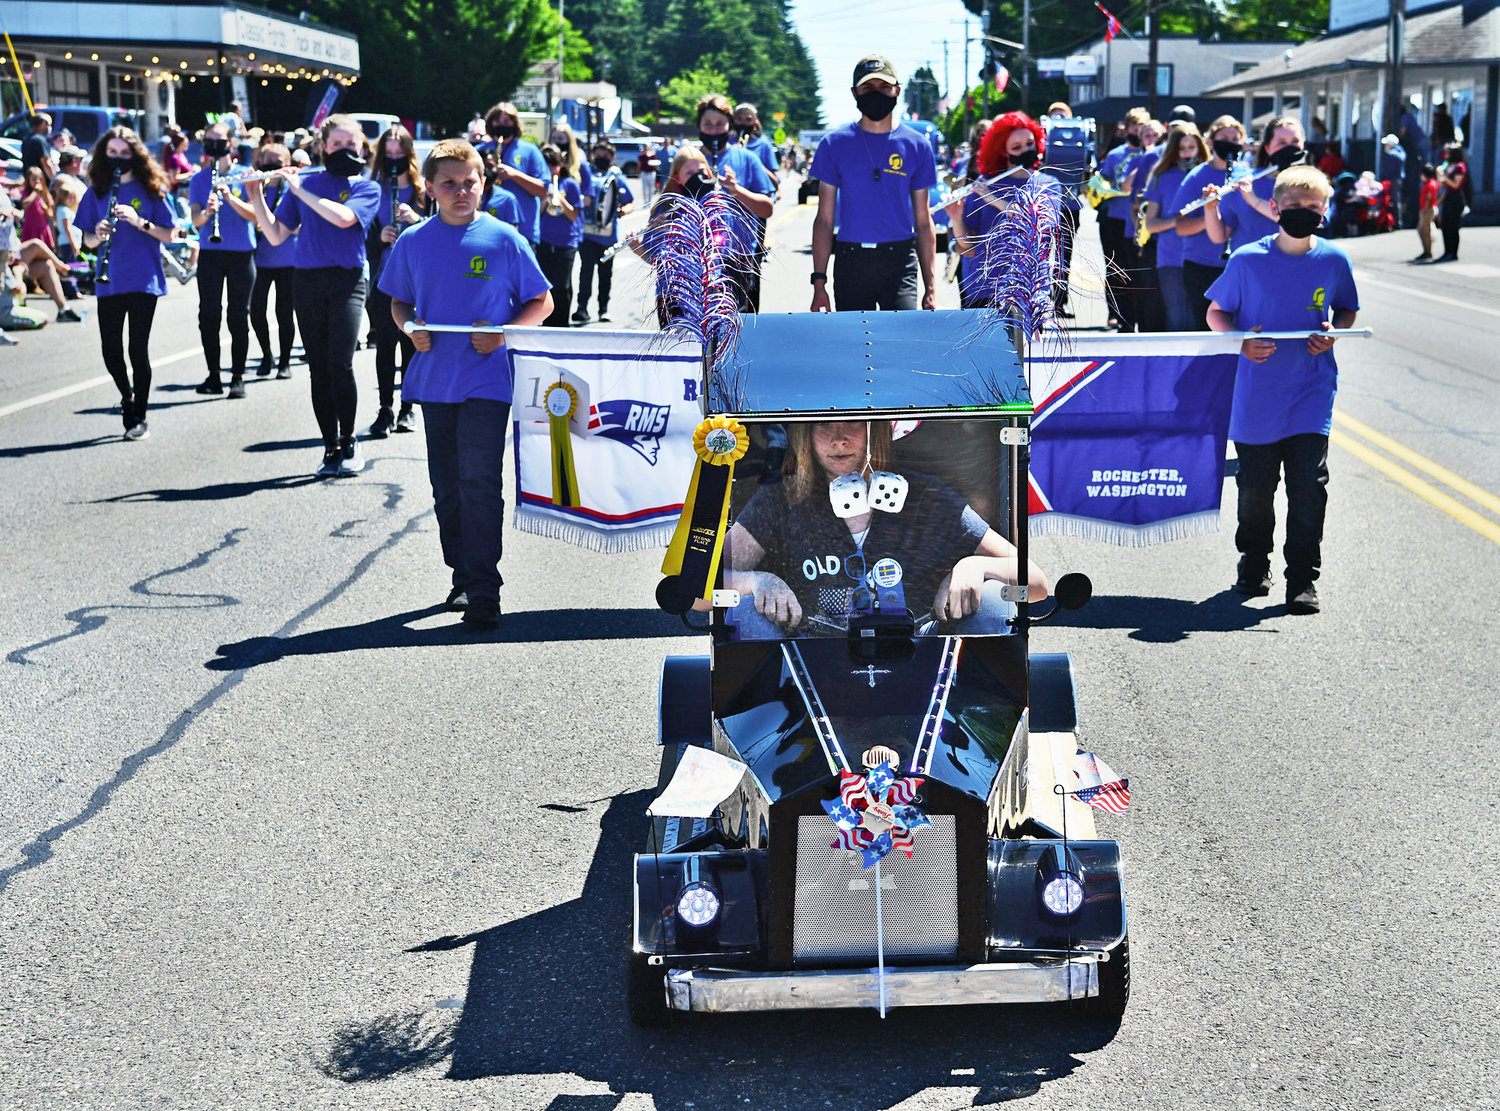 Representing Rochester Middle School, a marching band led by a cute, miniature car joins the Swede Day parade on Satuday, June 19.